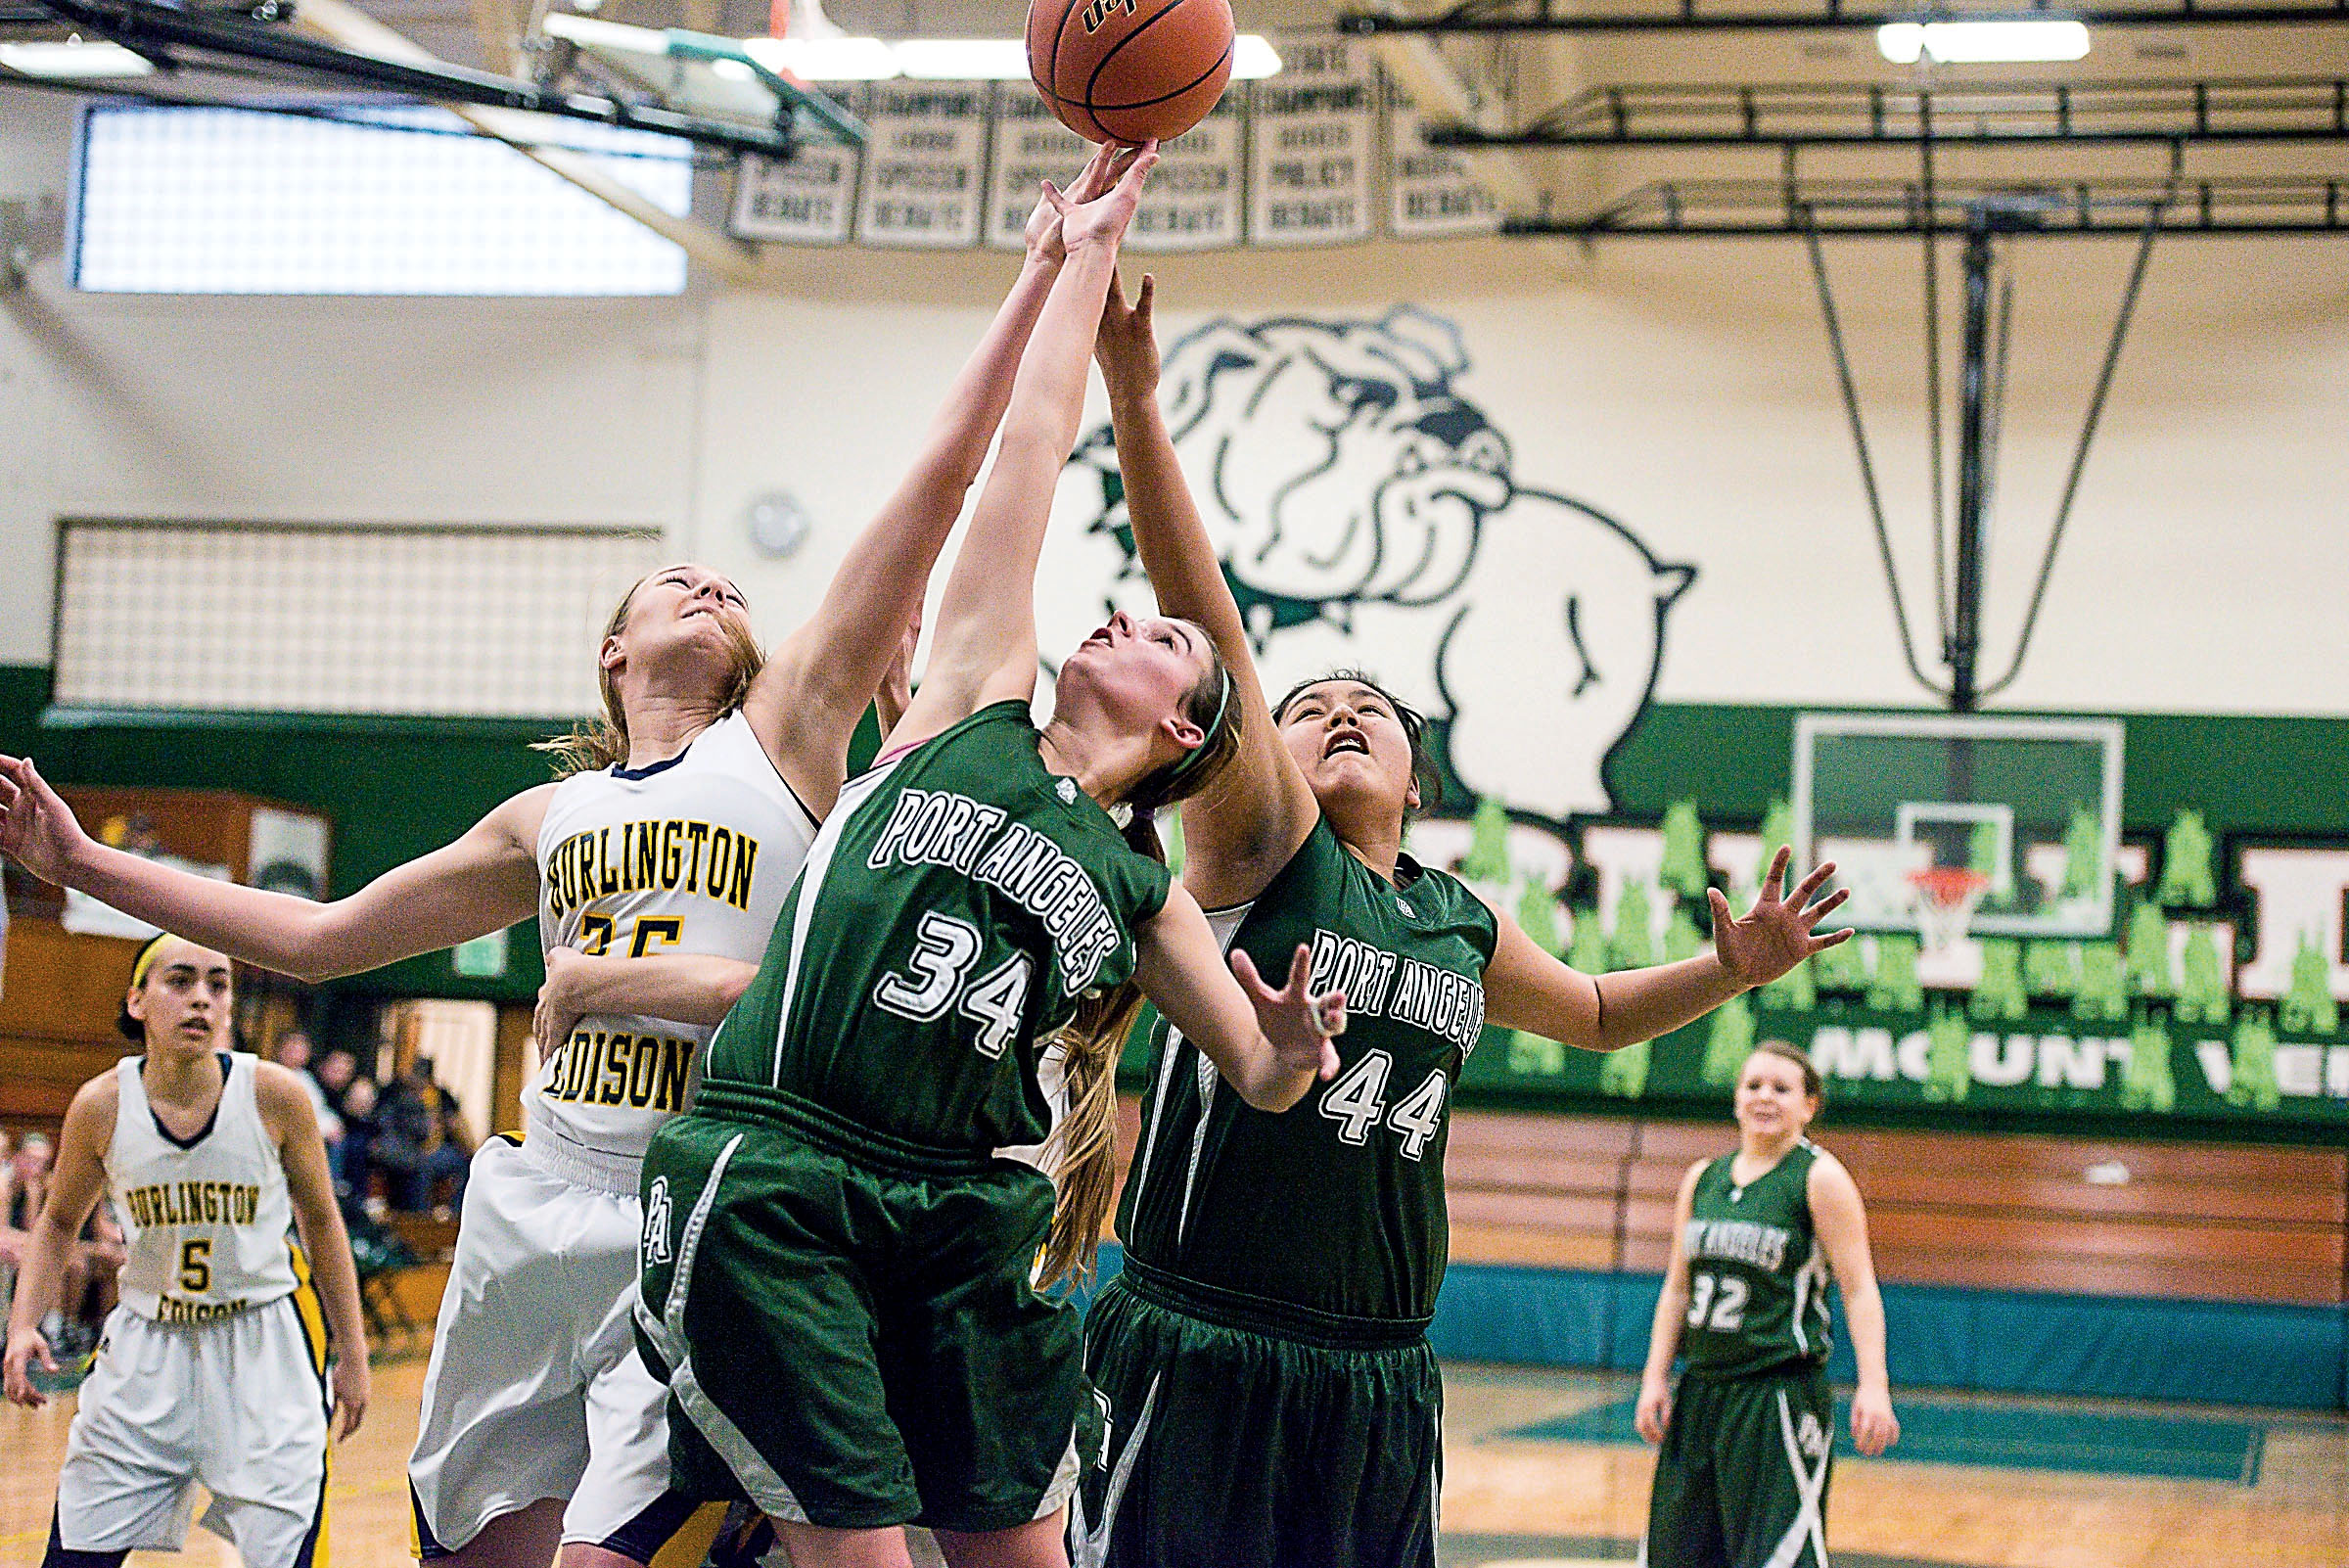 Port Angeles' Kylee Jeffers (34) and Nizhoni Wheeler (44) battle Burlington-Edison's Emily Agen for control of a errant pass by Burlington-Edison during the Roughriders' 54-46 regionals win last week at Mount Vernon High School. The Riders open the state tournament today against Lynden at the Yakima SunDome. Amylynn Richards/for Peninsula Daily News